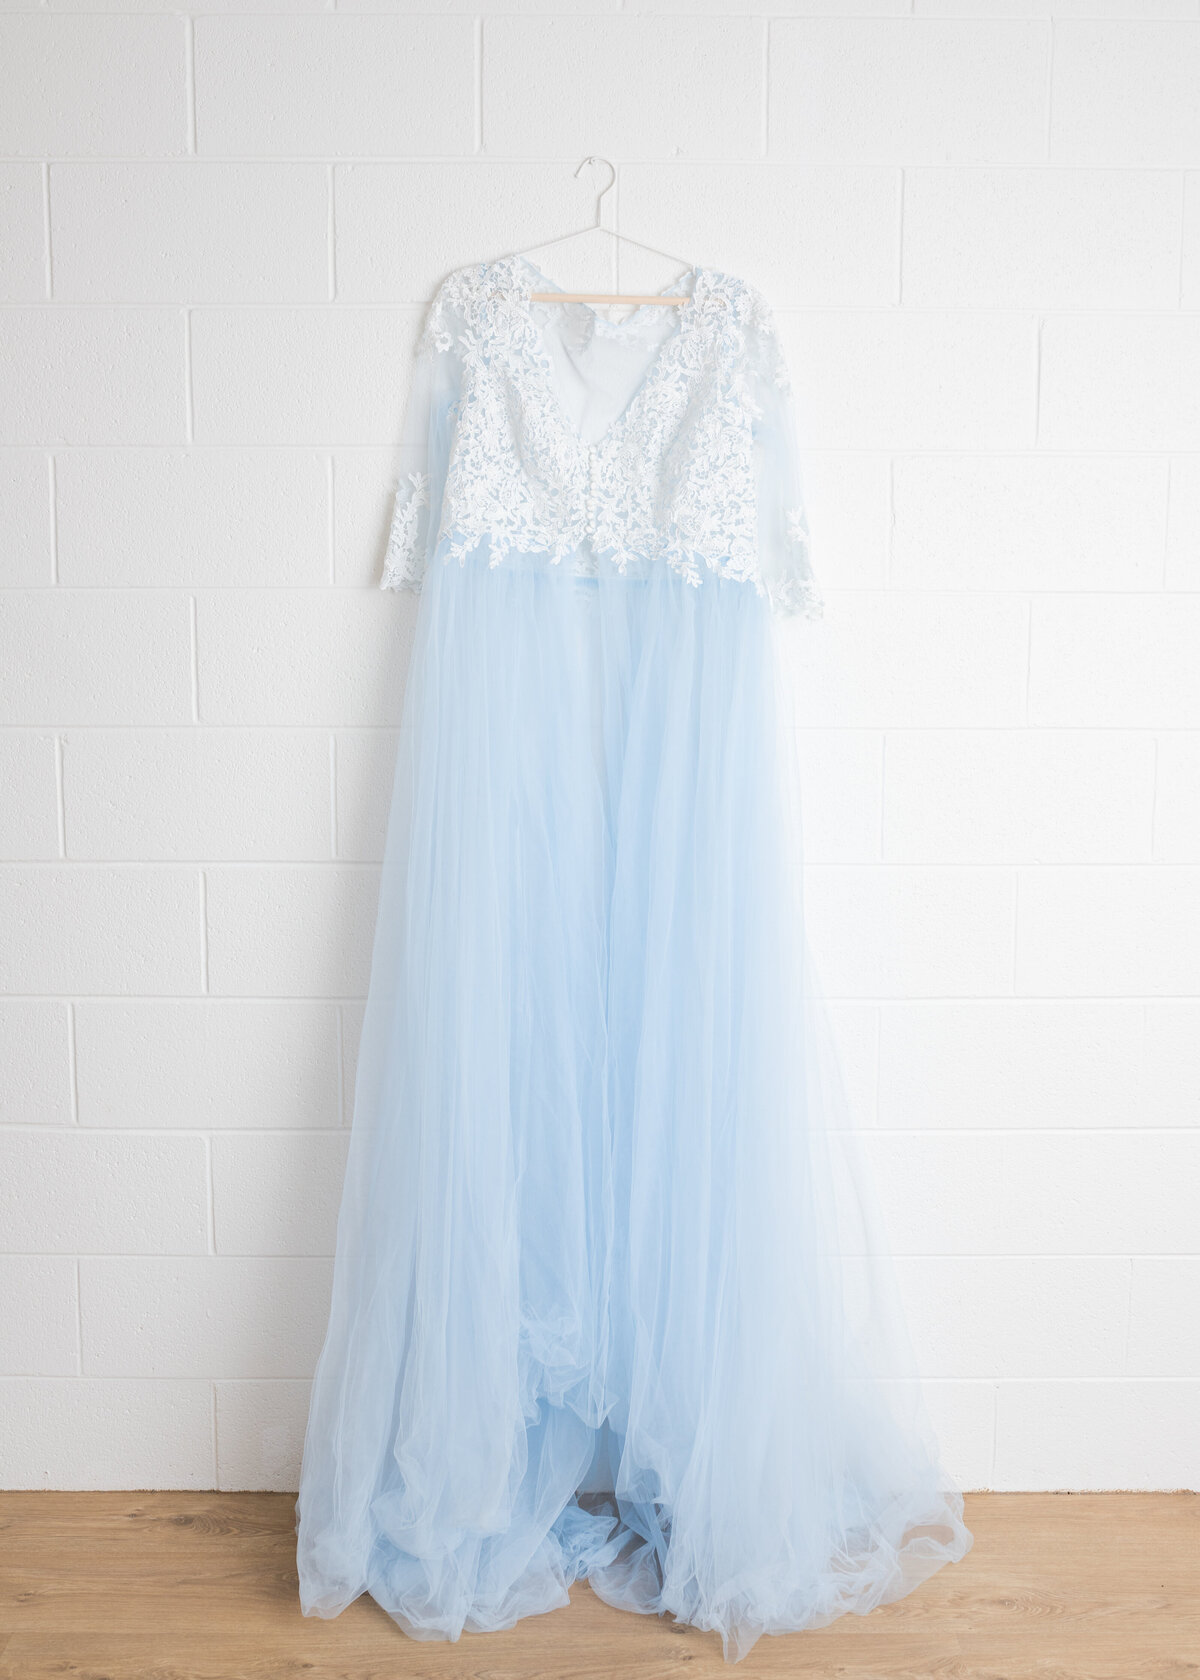 Lace Bodice | Blue Tulle | Semi Sheer maternity dress, available in Lauren Vanier Photography's Client wardrobe.